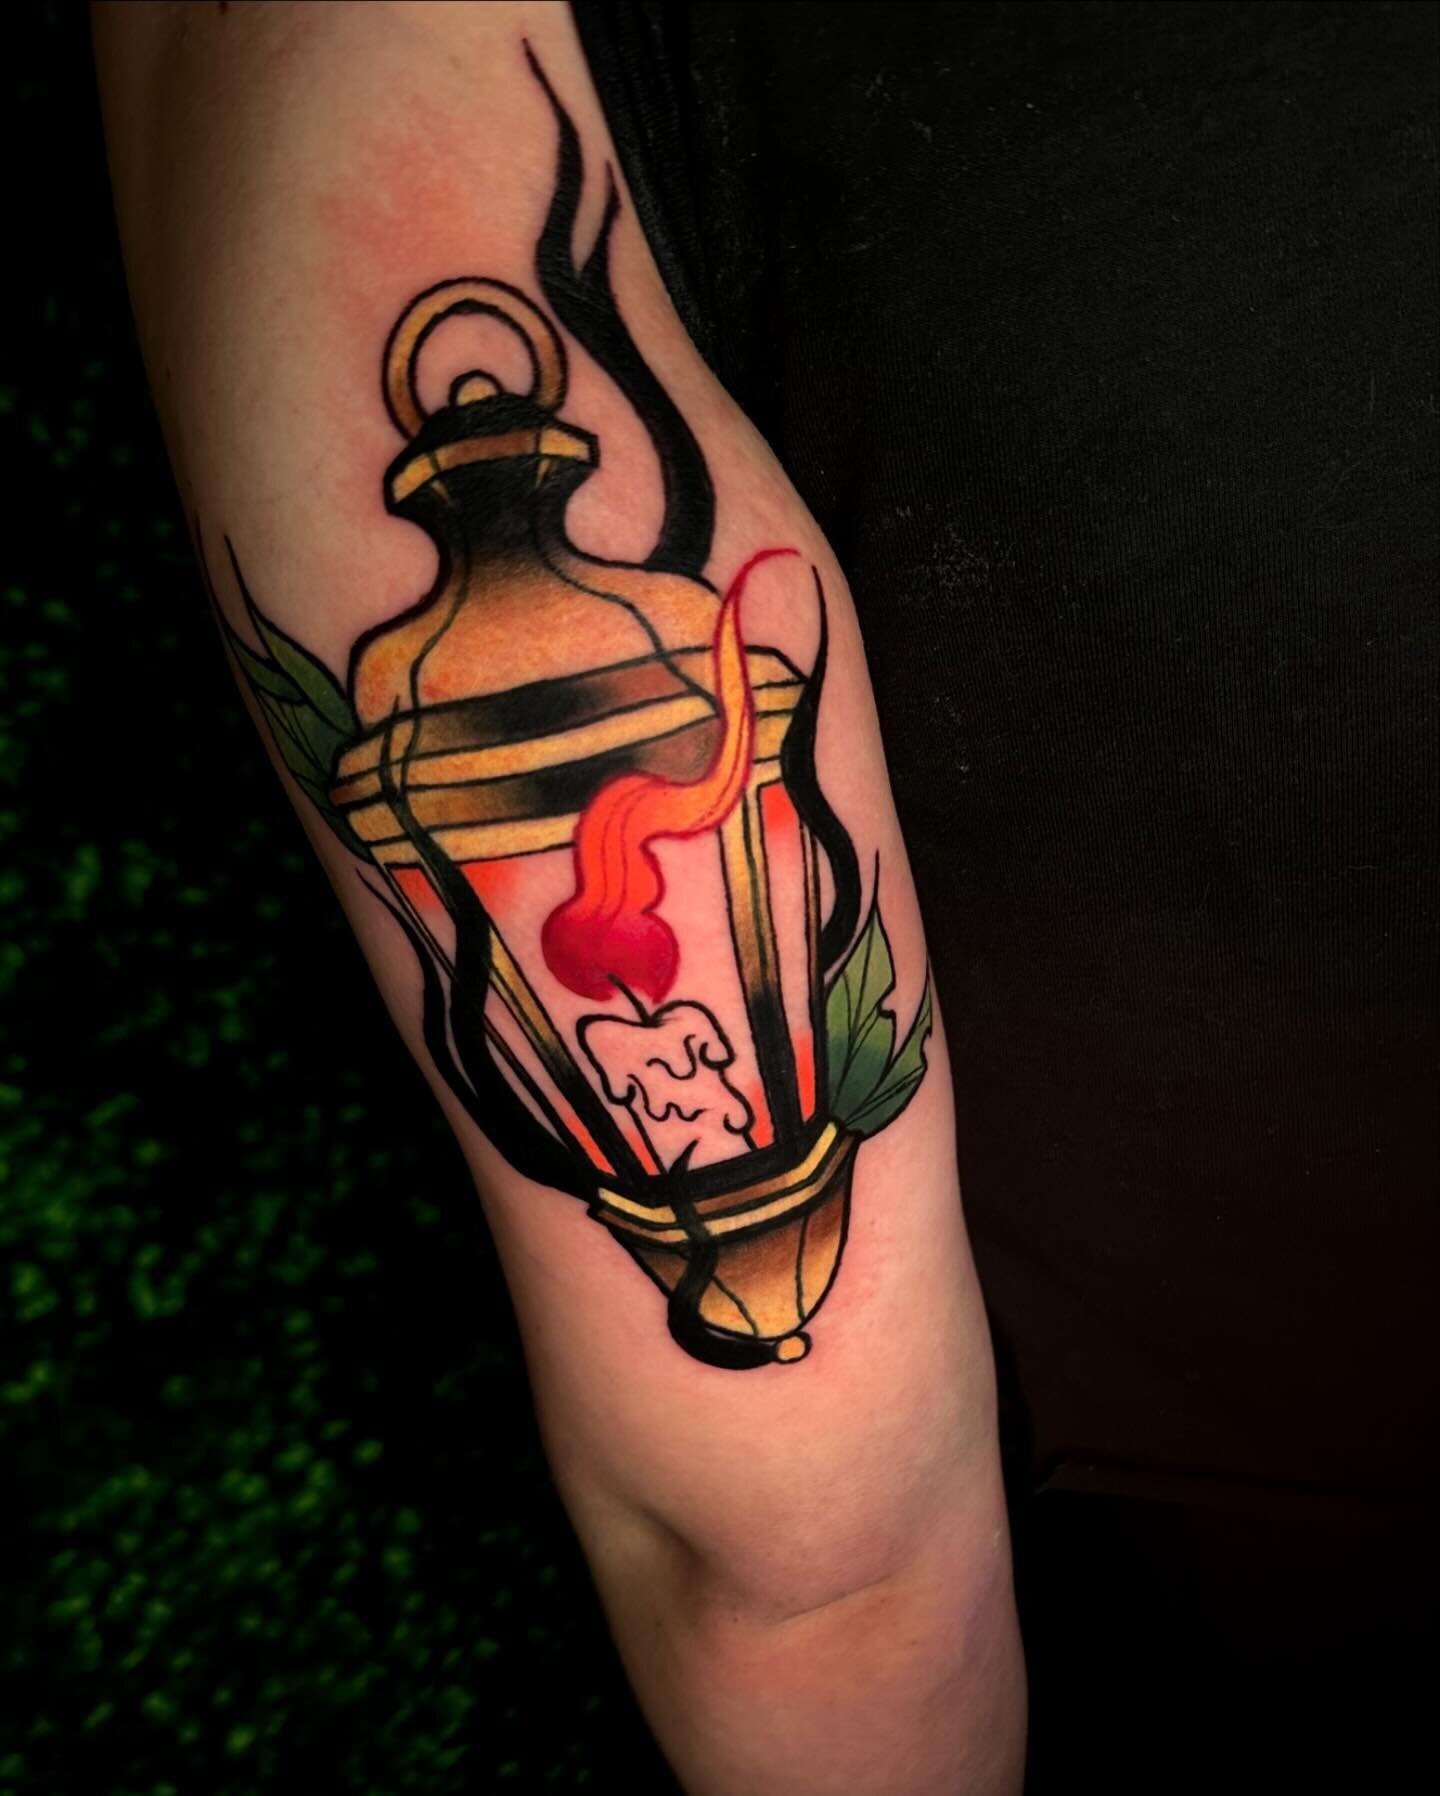 I got to do this cool lantern for my friend @rebekahdaniel ! She told me she needed to light some stuff up and I said I can do that. 

Thanks for hanging out and getting something cool! Thanks for the loaves of bread! 

Hit me up and we can make cool